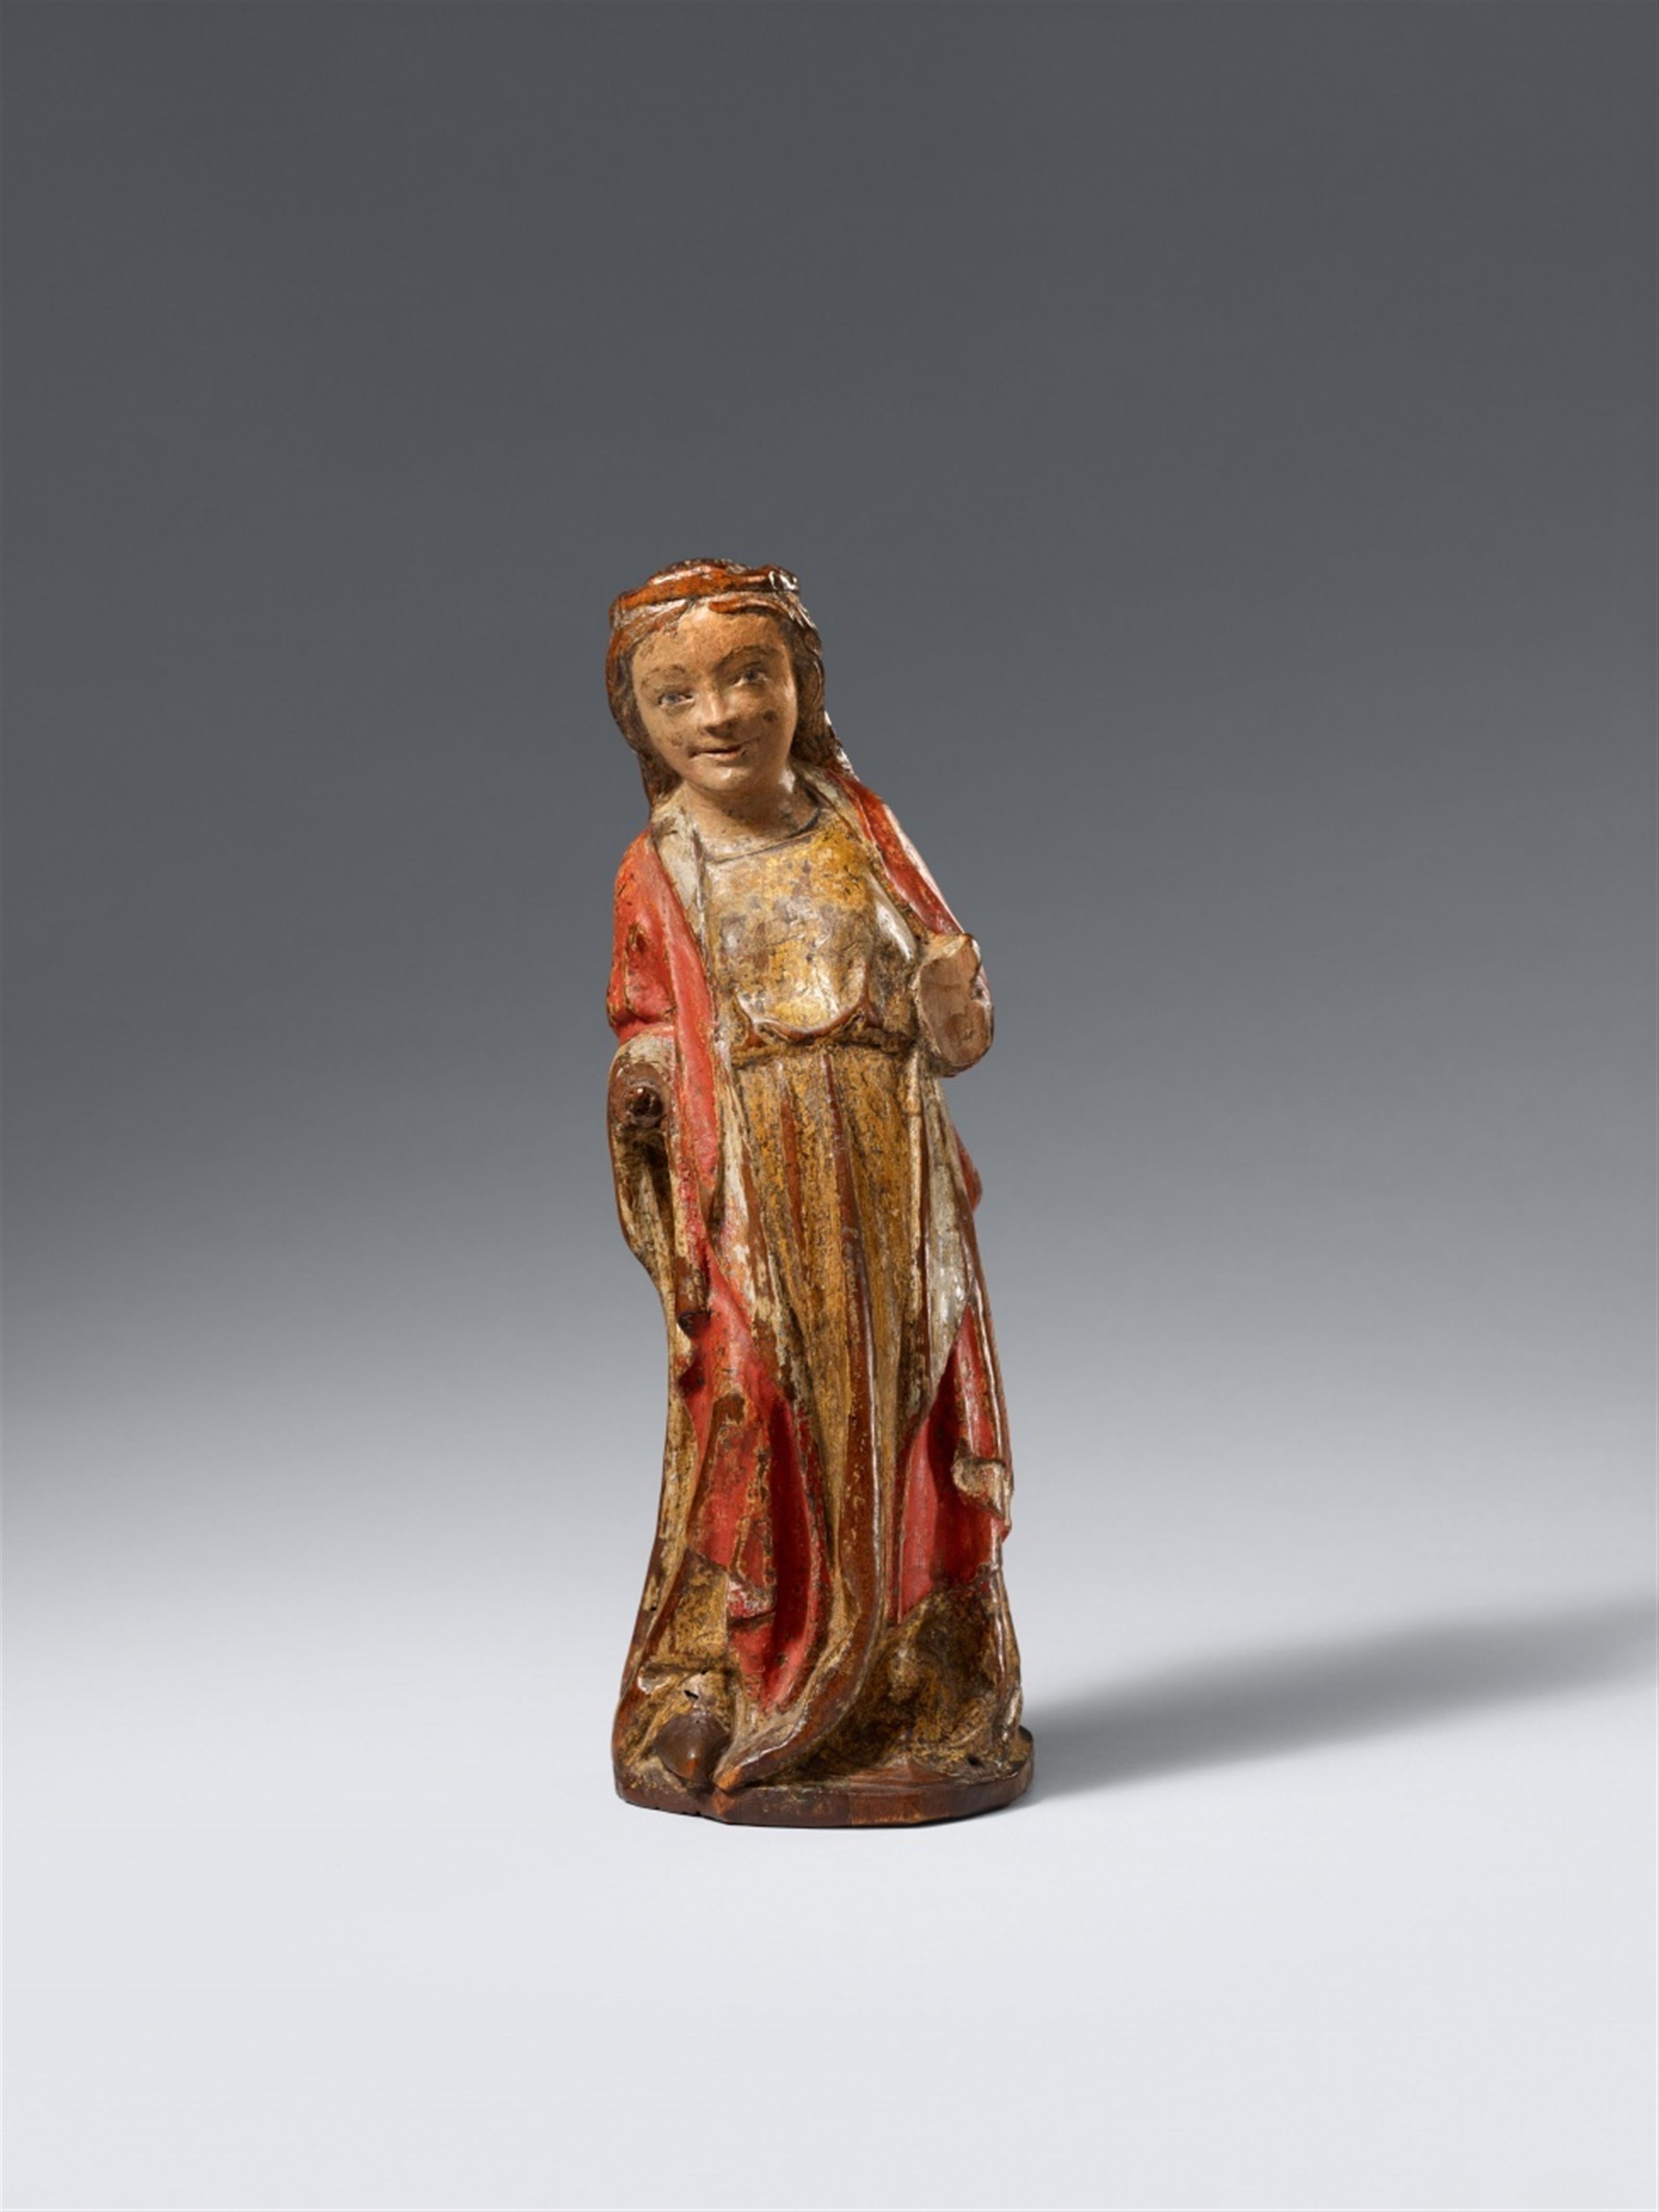 Cologne ca. 1330 - A wooden figure of a standing Saint, Cologne circa 1330. - image-1